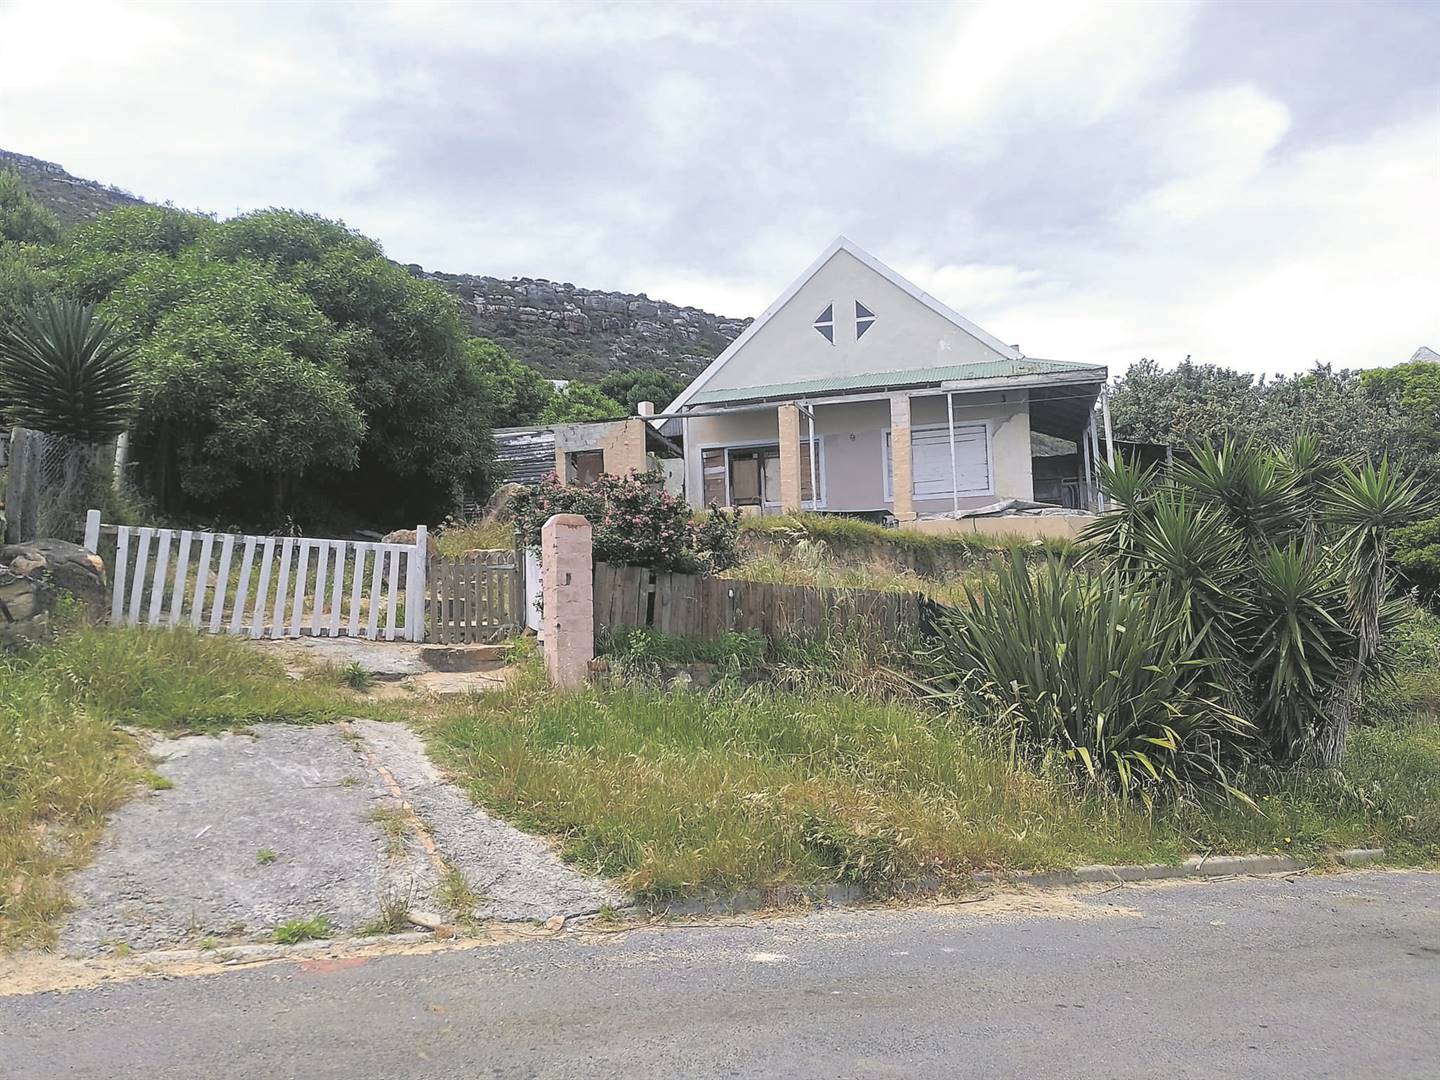 According to the Simon’s Town Community Policing Forum (CPF) the problem house situated in Glencairn Heights has been an issue for a number of years.